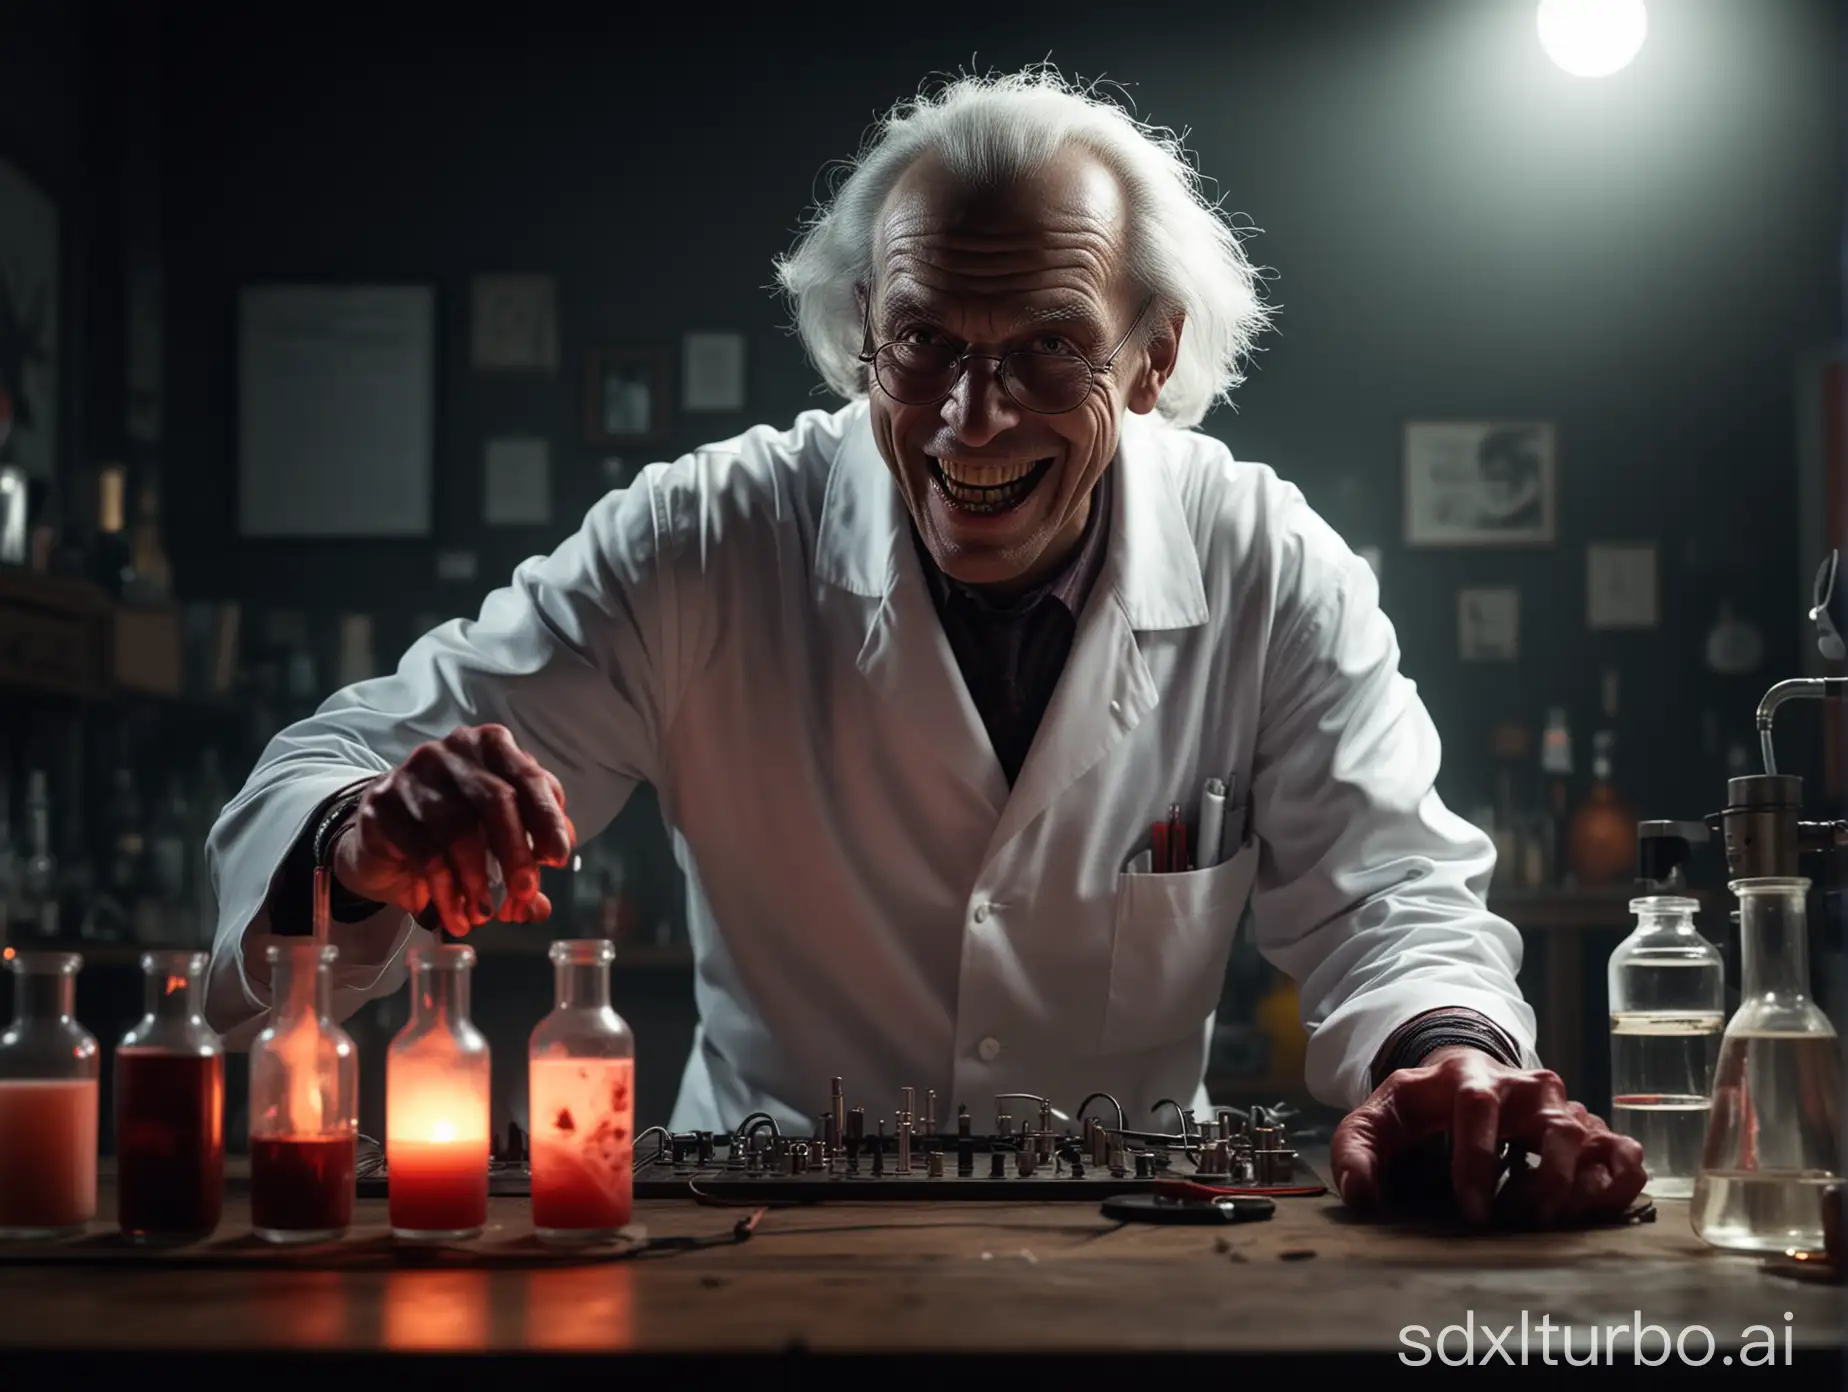 Create a high resolution, 16:9 aspect ratio, image about "true science scary stories". Show a crazy scientist doing wicked science experiments, alone, evil grin, in a lab, at night, dark room, red lighting, scary lights, menacing, mad scientist, night lights, photorealistic, dark, sketchy, atmospheric, catchy, vibrant colors, must pop and catch attention.